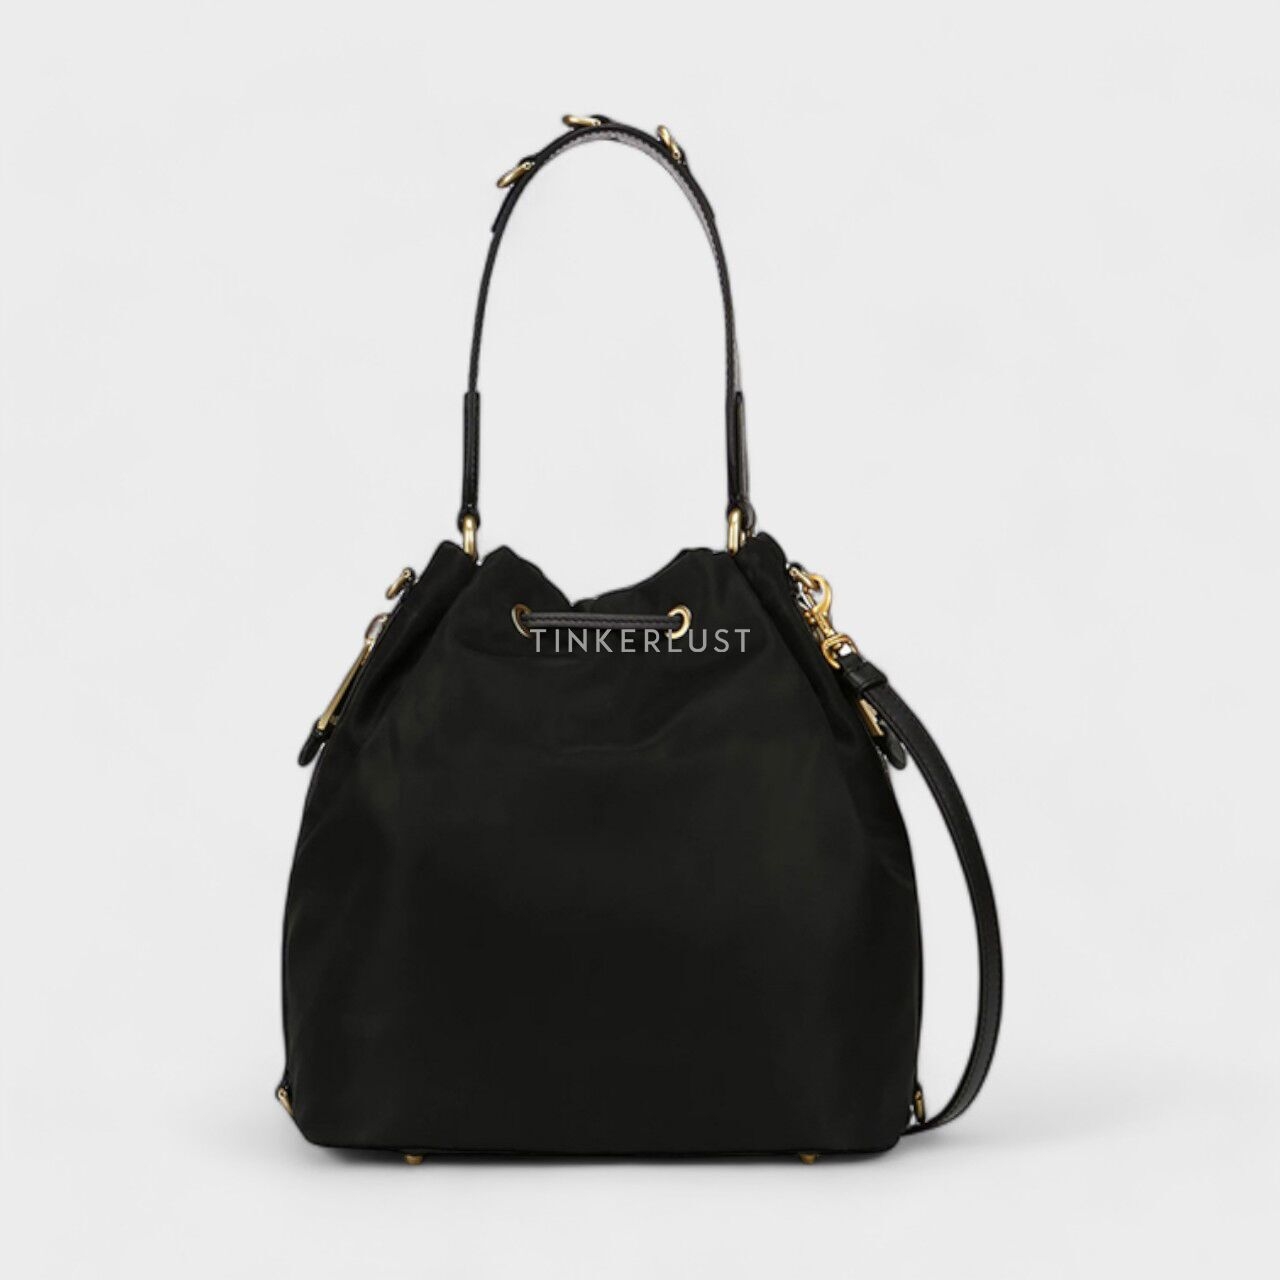 Moschino Small Lettering Logo Bucket Bag in Black with Tassels Satchel